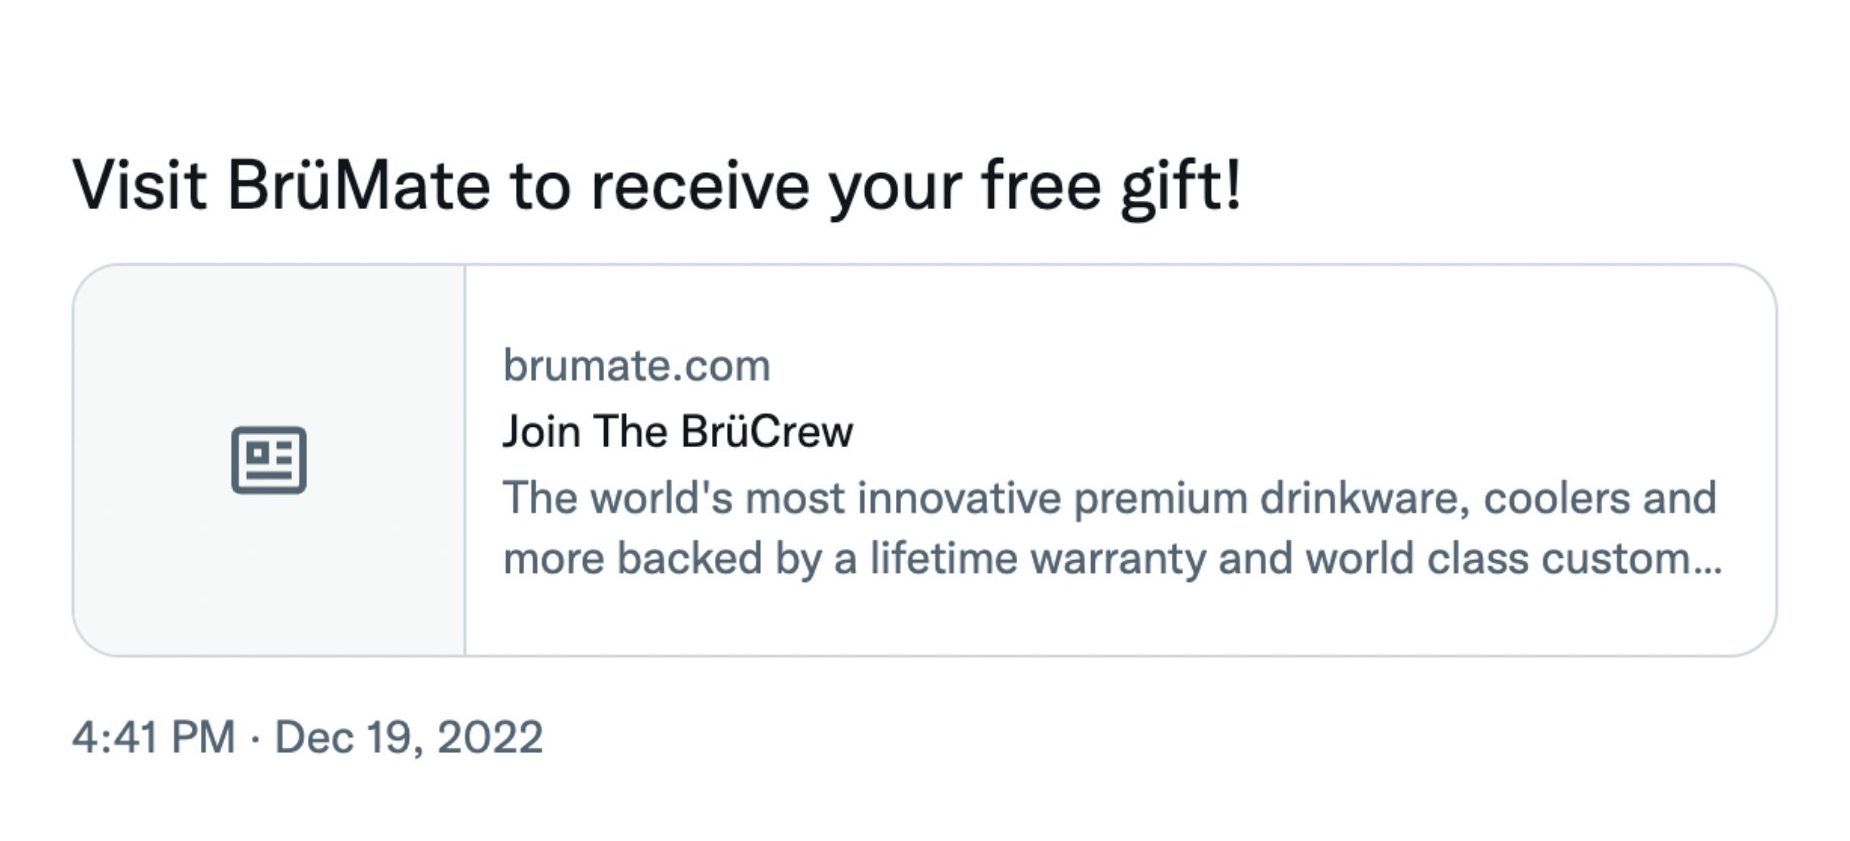 Tweet screenshot of BrüMate's referral message that says "visit BrüMate to receive your free gift"